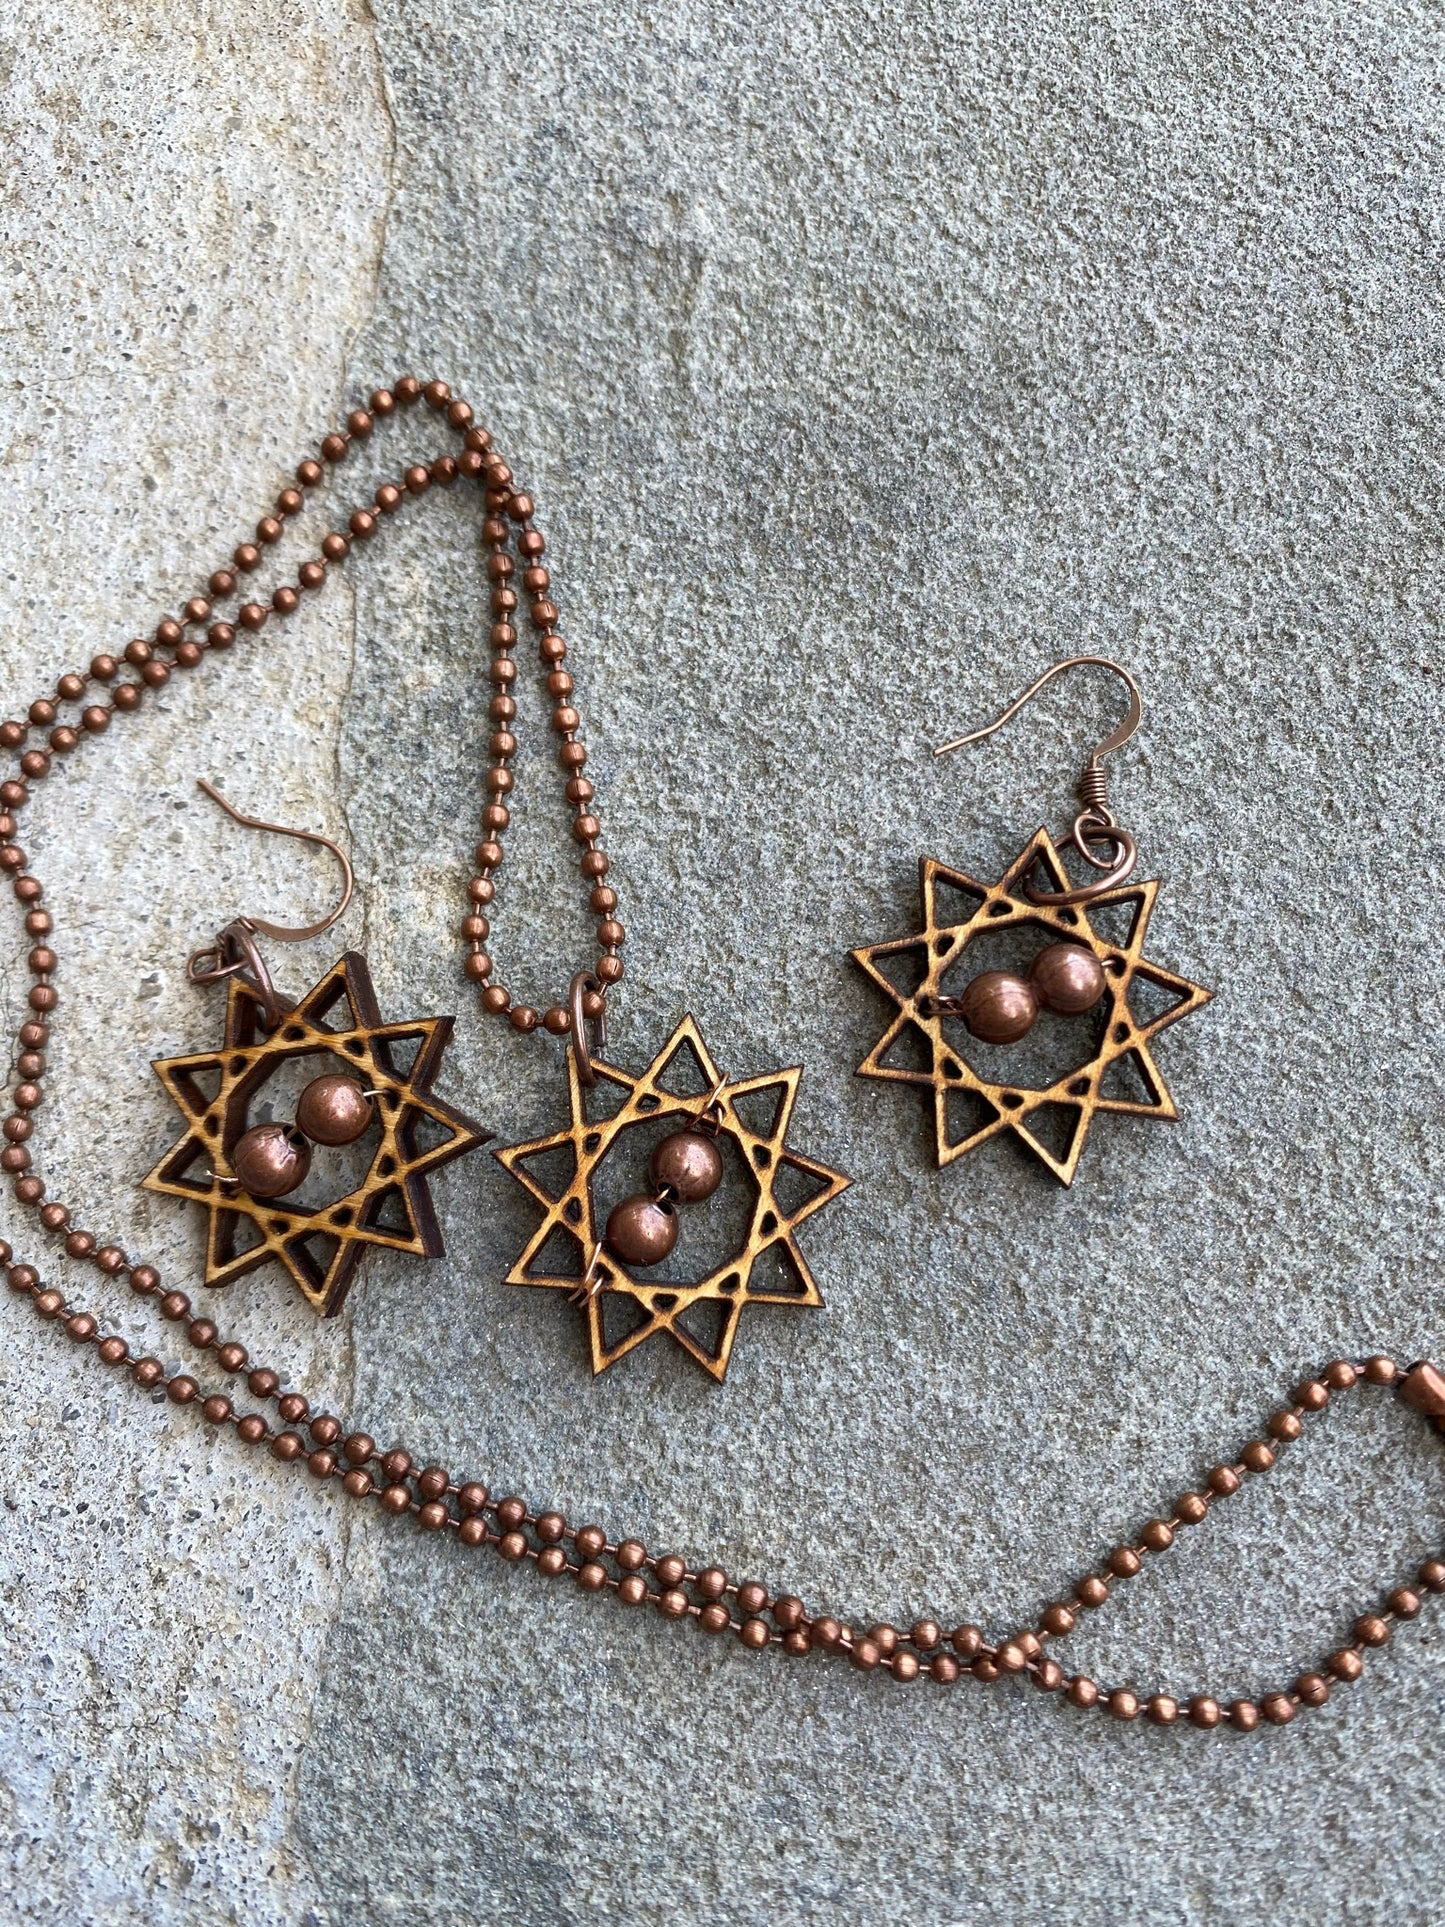 Nine Pointed Star Necklace And Earring Set With Copper Beads